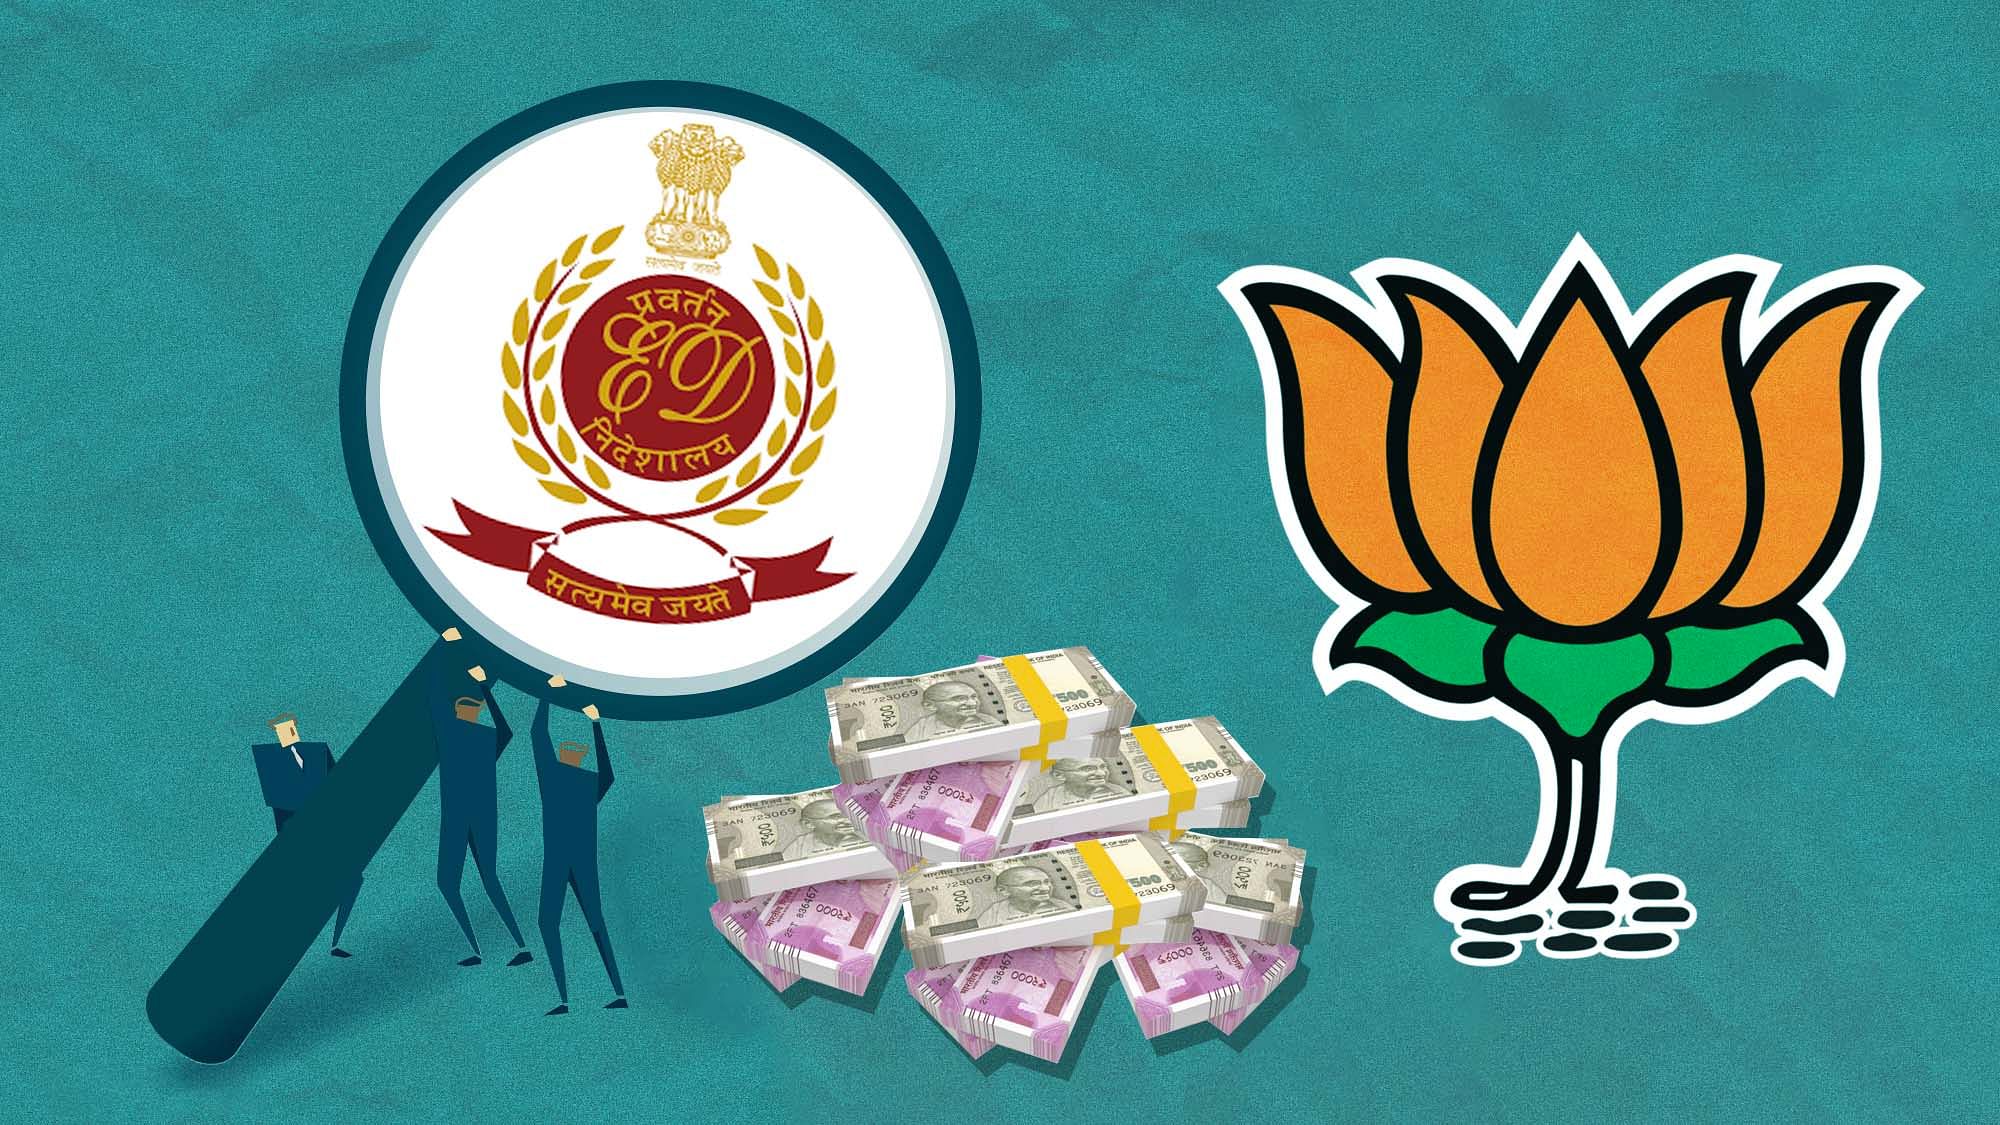 According to a report by The Wire, RKW Developers Ltd. gave Rs. 10 crore to the BJP in 2014-15.